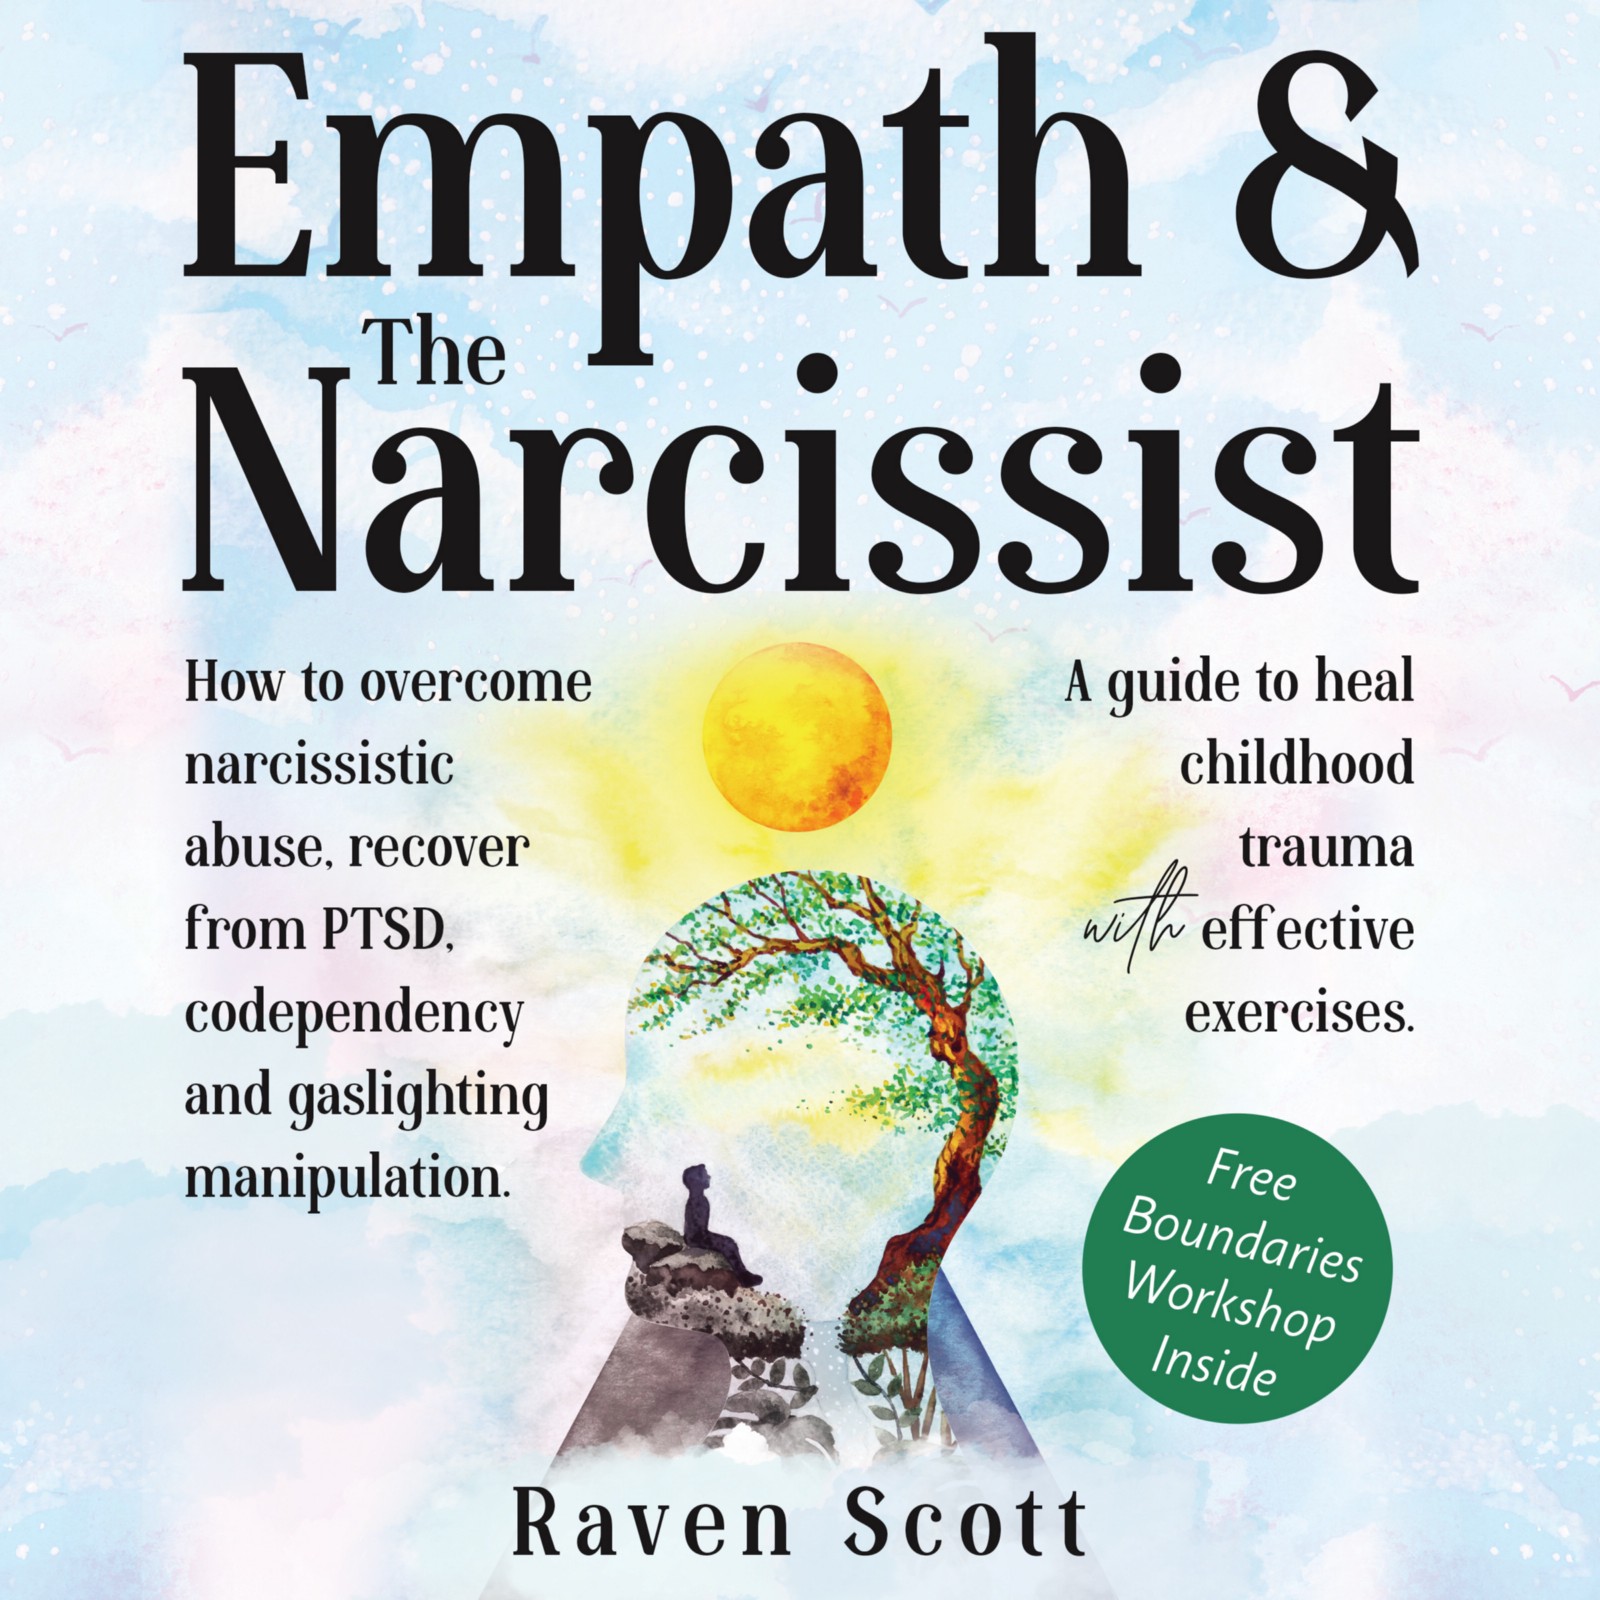 The image shows a hand holding a cup of tea with a saucer containing a cookie. Next to the hand are two tablets displaying the cover of a book titled "Empath & The Narcissist" by Raven Scott. The book cover features a tree with a face representing empathy on one side and a face representing narcissism on the other side. The subtitle reads: "How to overcome narcissistic abuse, recover from PTSD, codependency and gaslighting manipulation." Below the tablets is the Amazon logo, indicating the book is available for purchase on Amazon.